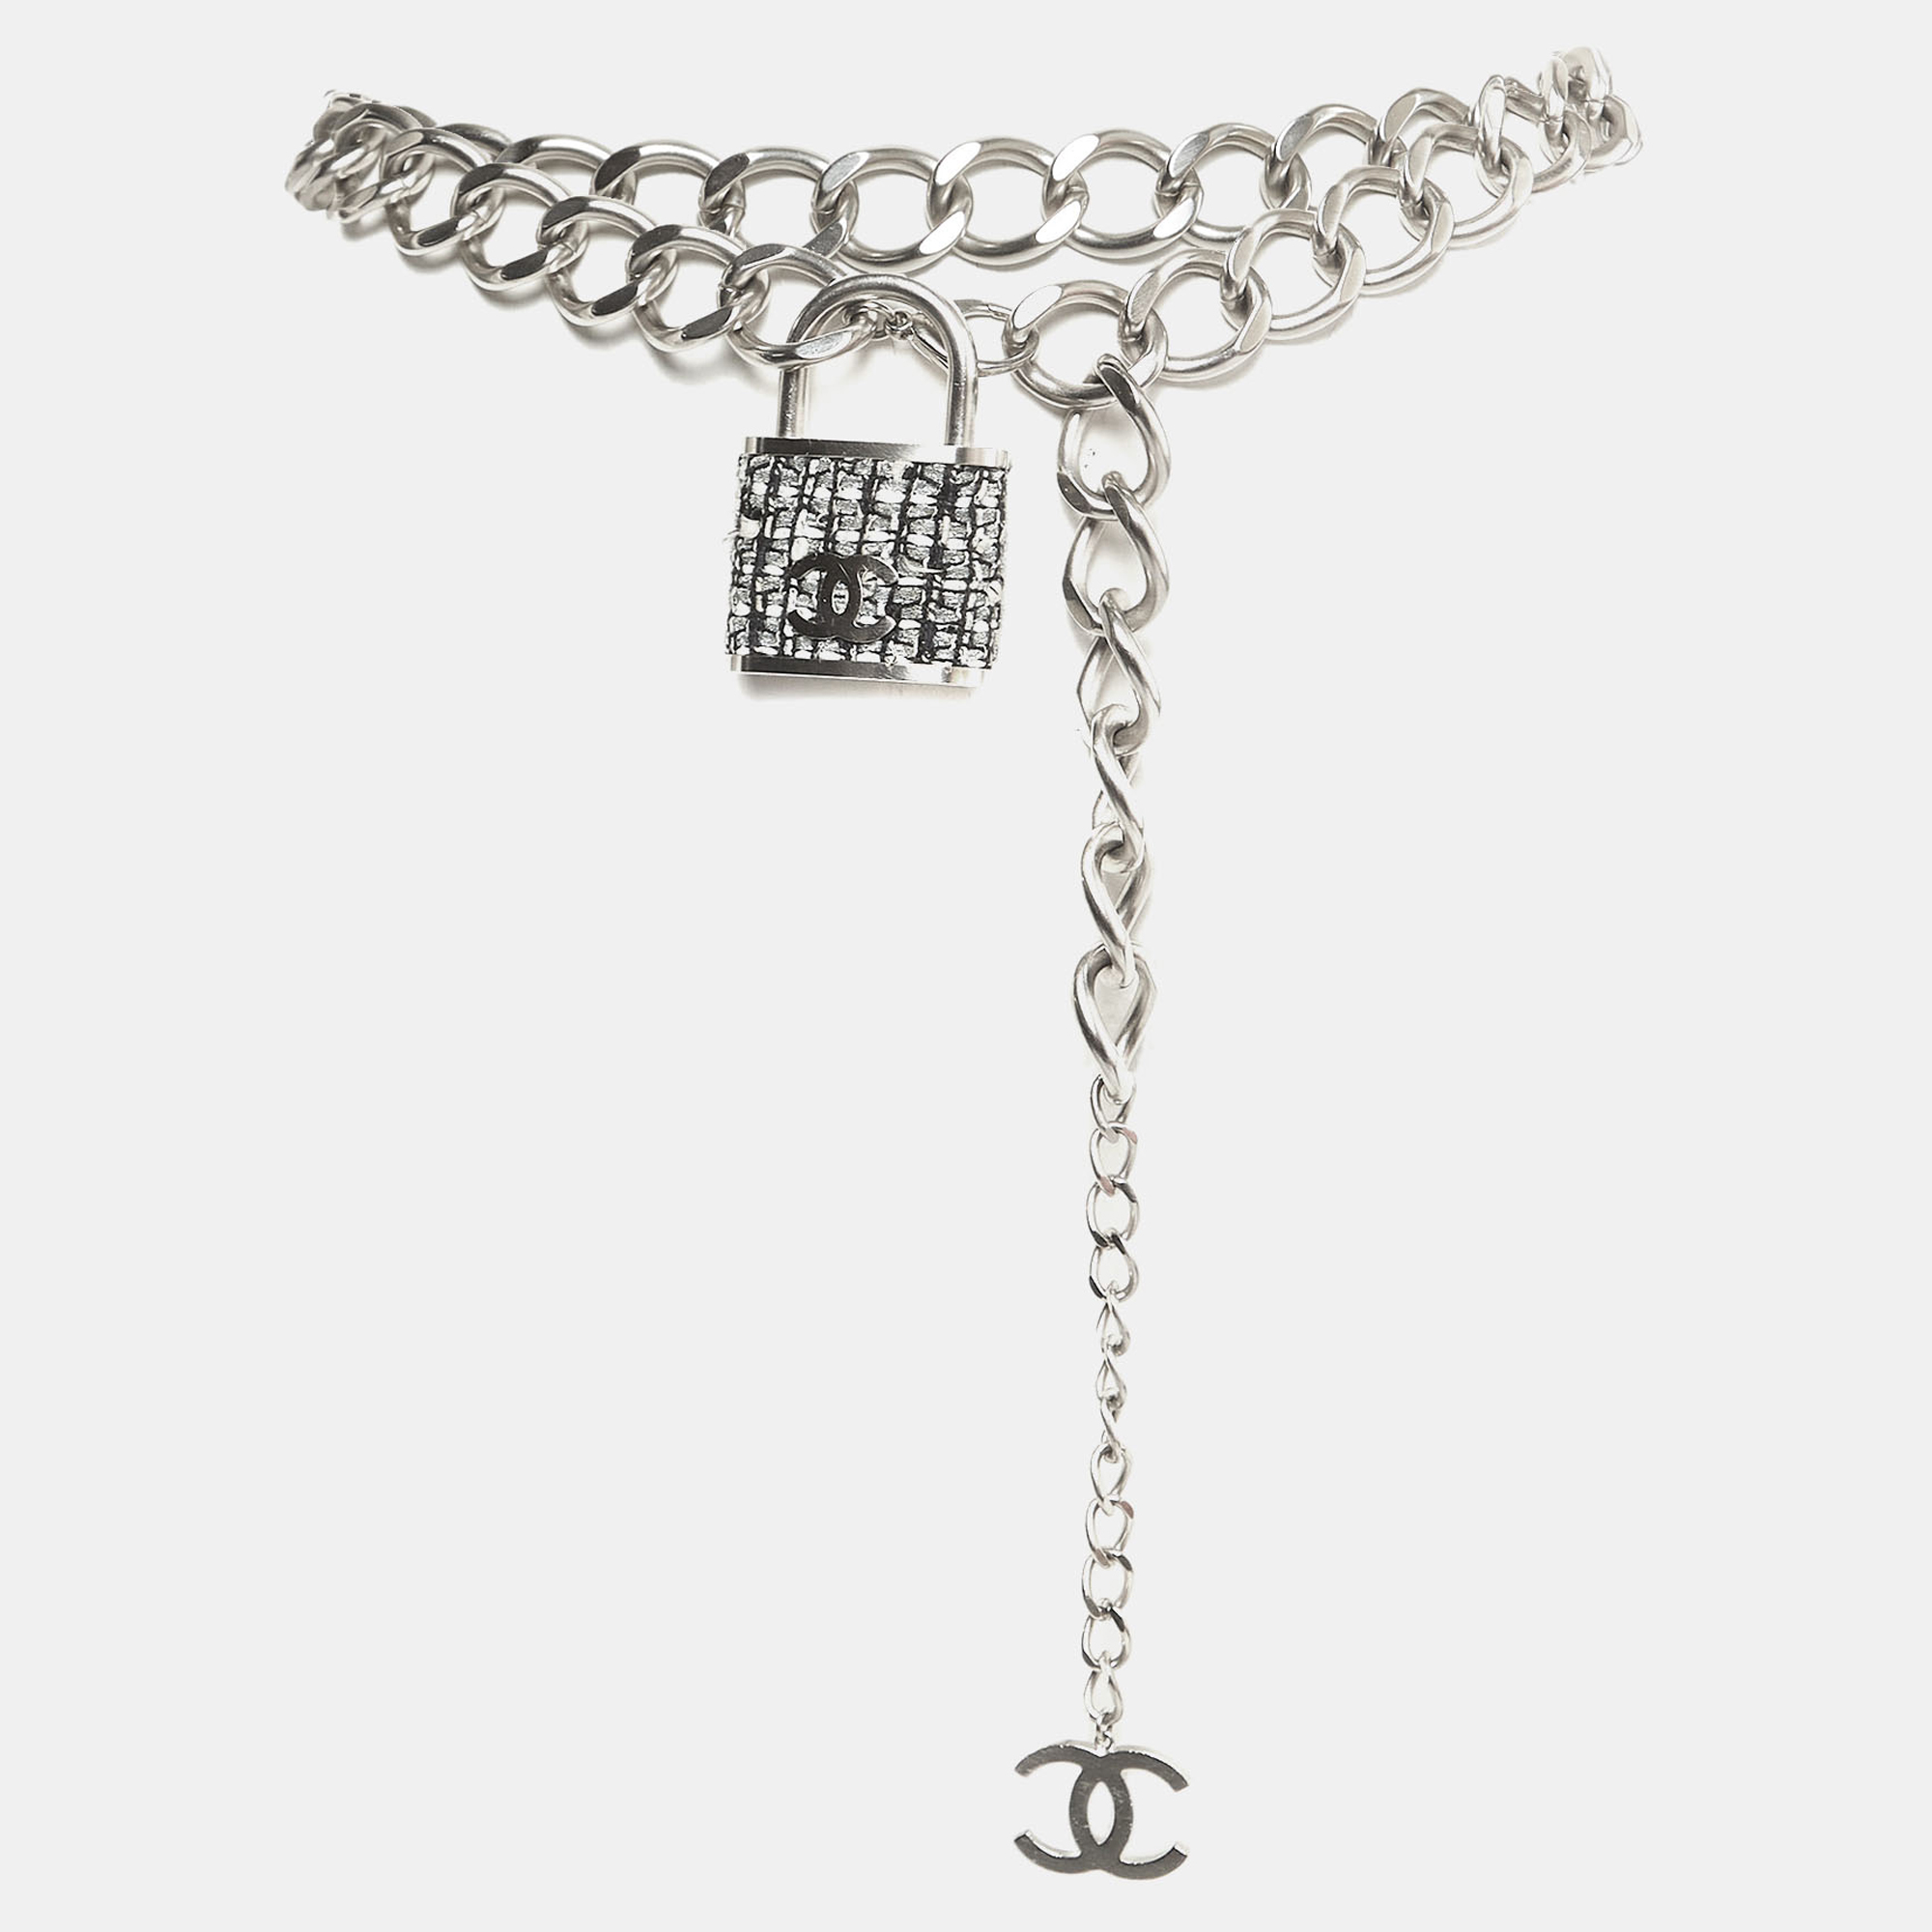 This waist belt from the House of Chanel will definitely elevate the look of your attire. It is created using silver tone metal and is embellished with CC logo accents. Add this classy Chanel creation to your collection to create multiple looks.